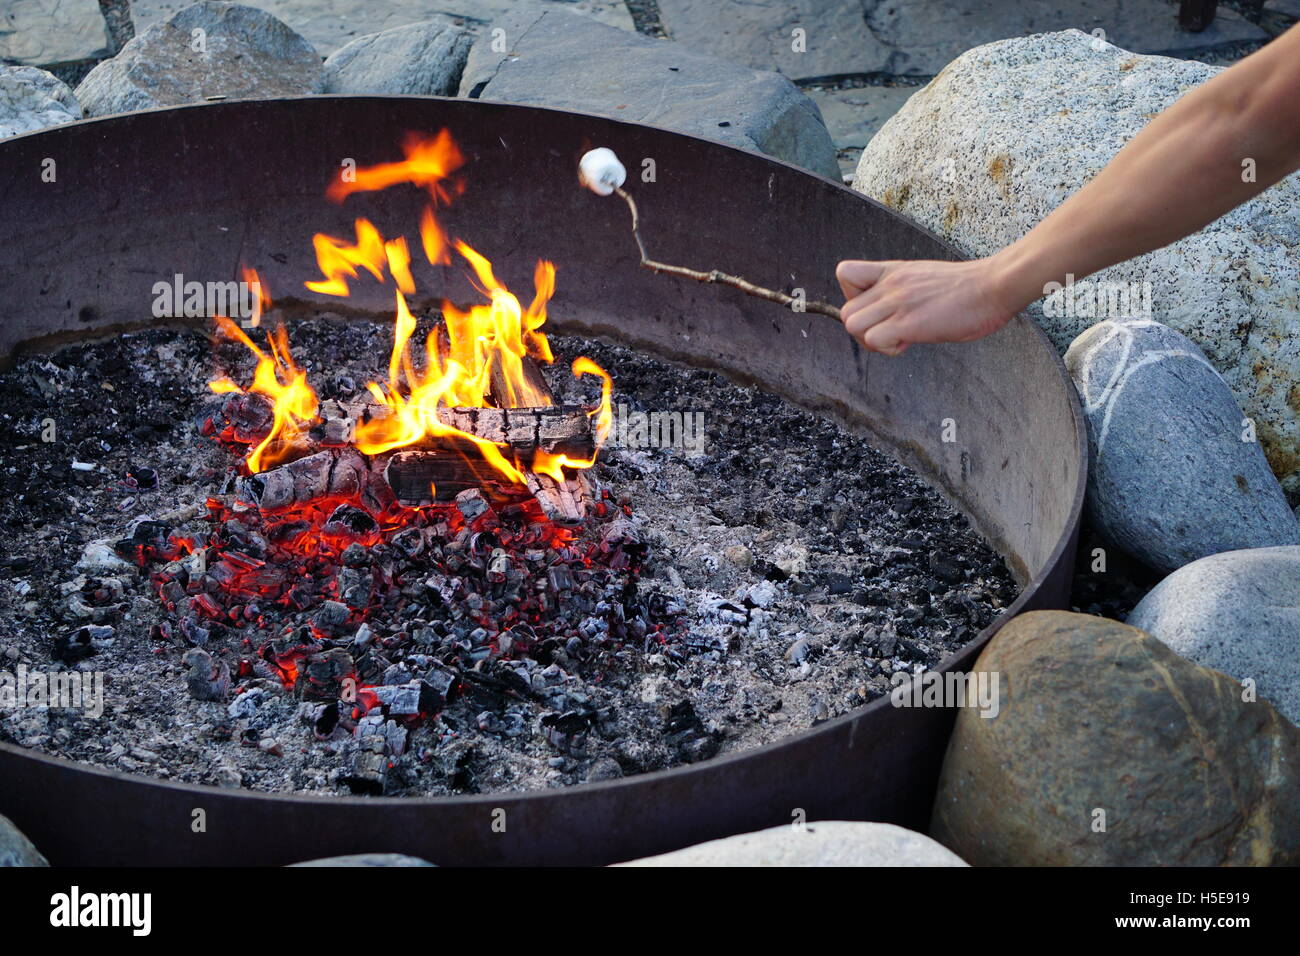 Flame of burning wood in a metal fire pit (campfire) Stock Photo